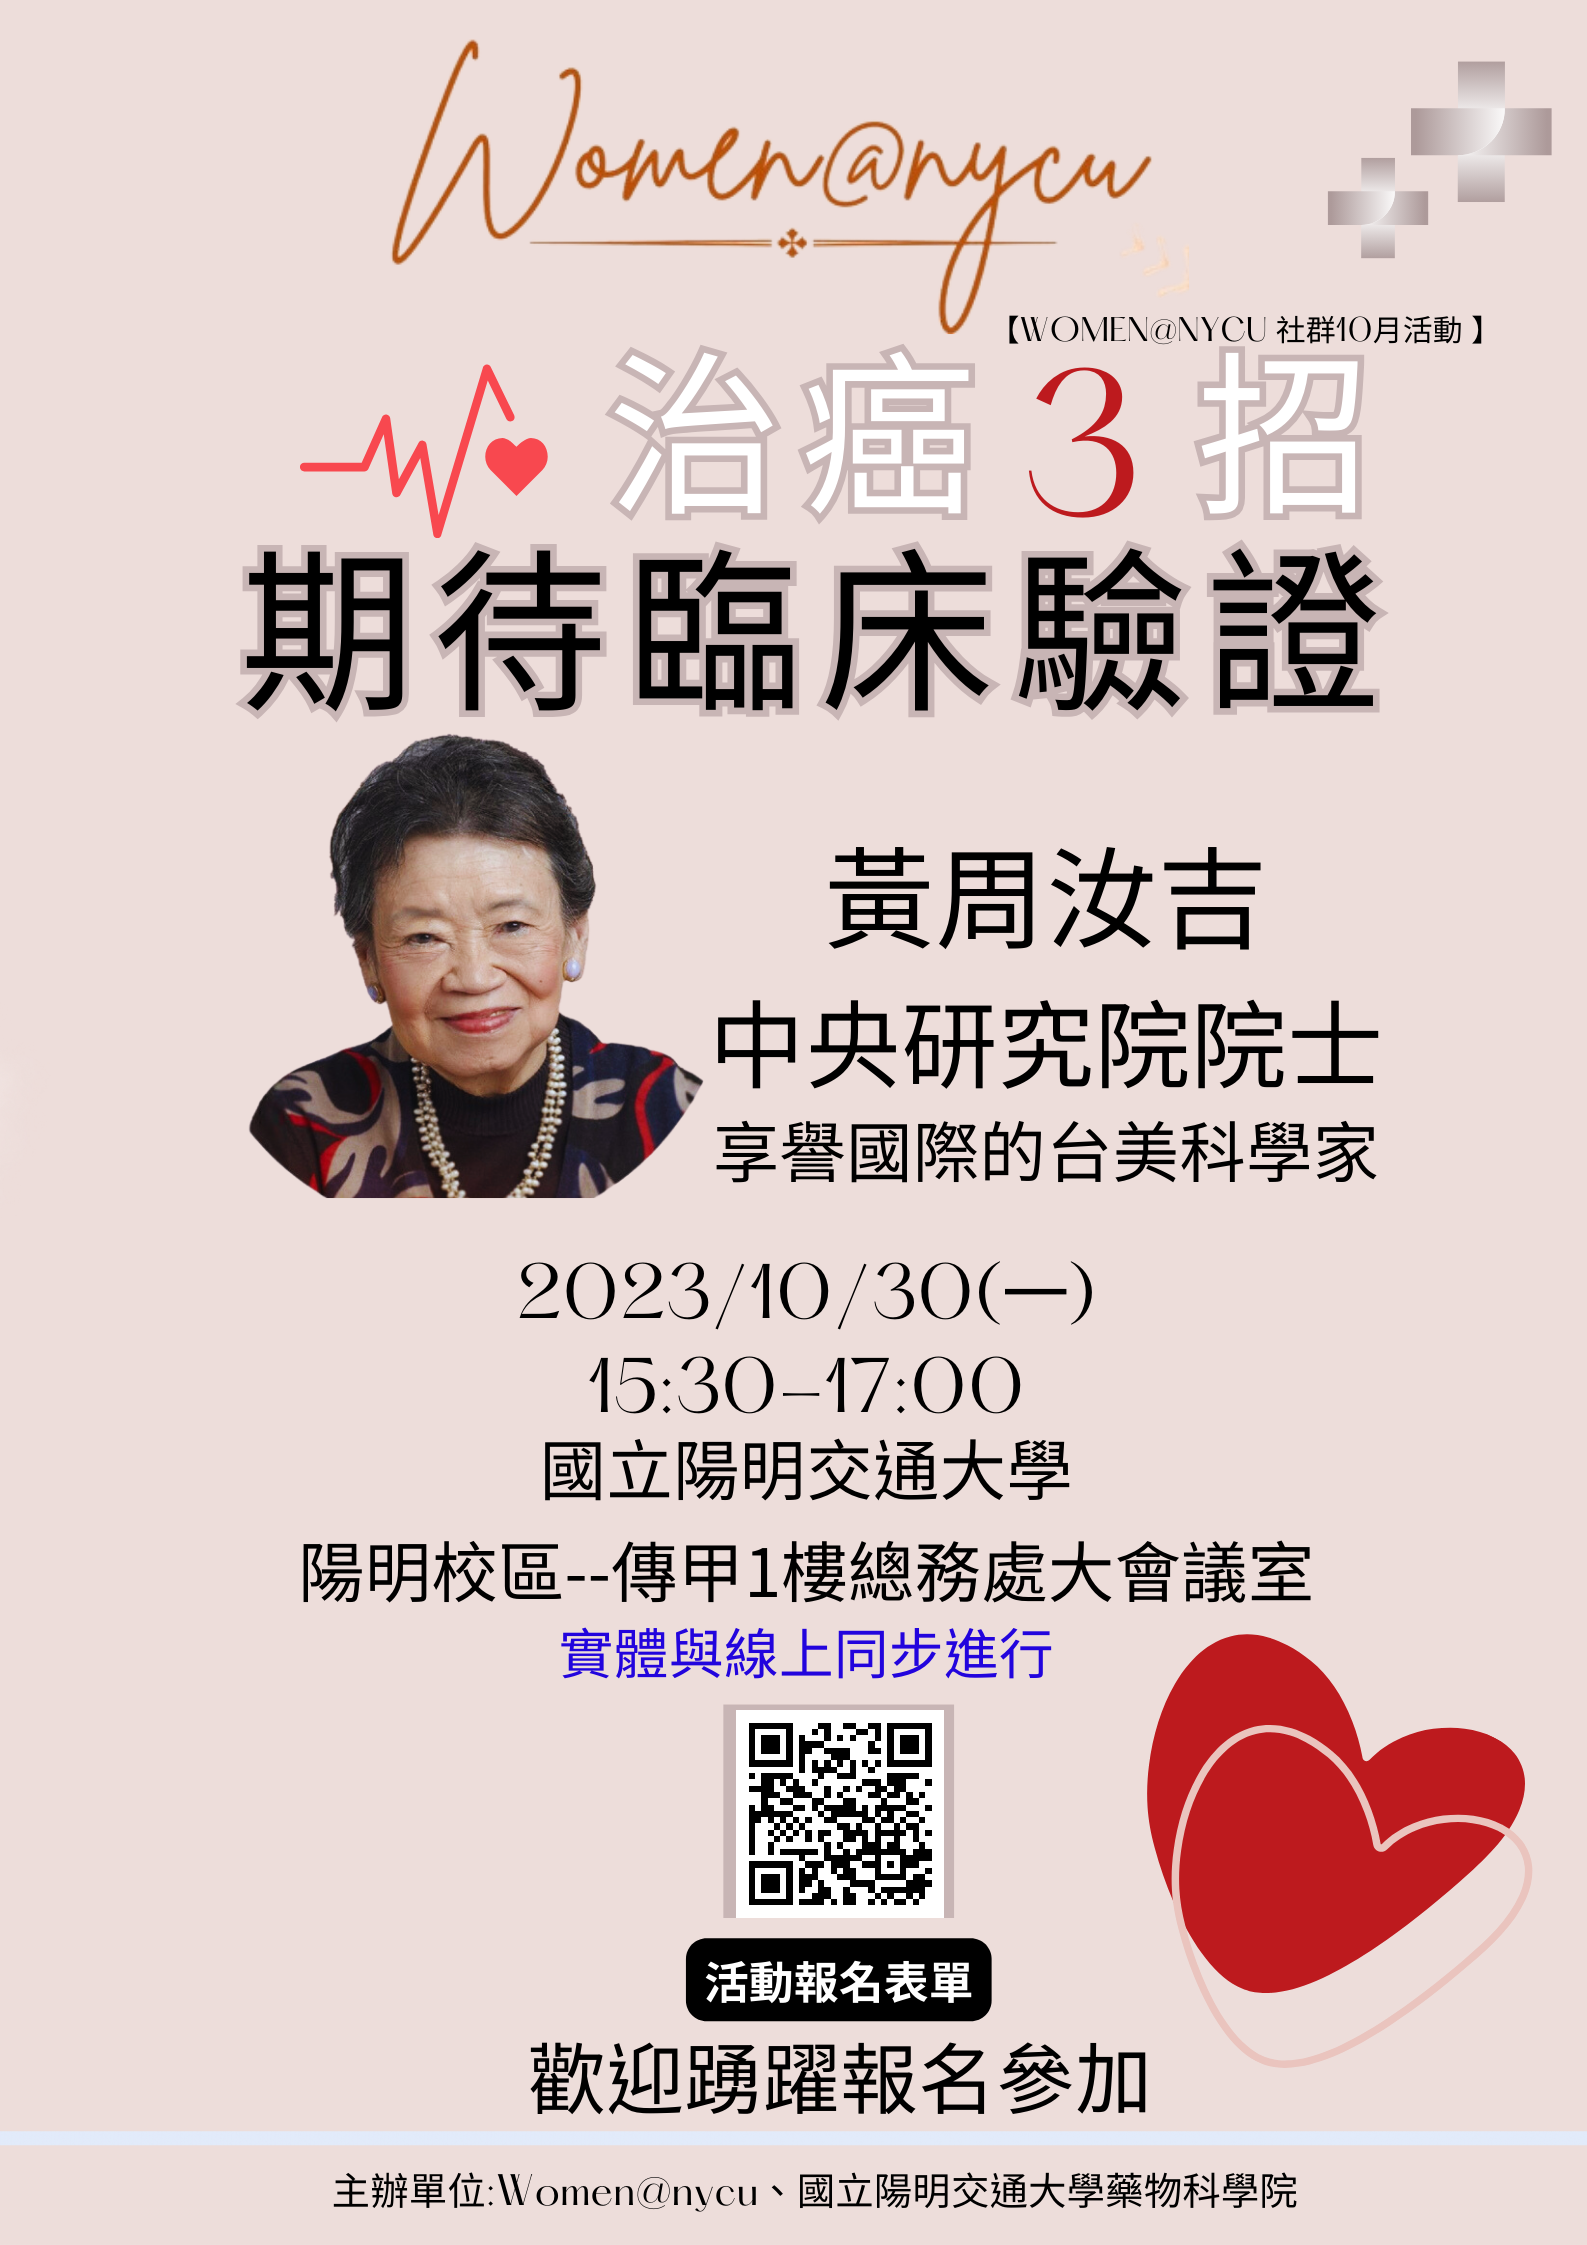 【Women@nycu Community October Event】 You are cordially invited to the speech entitled “Three Strategies for Cancer Treatment, Anticipating Clinical Validation” by academician R.C. Wong.